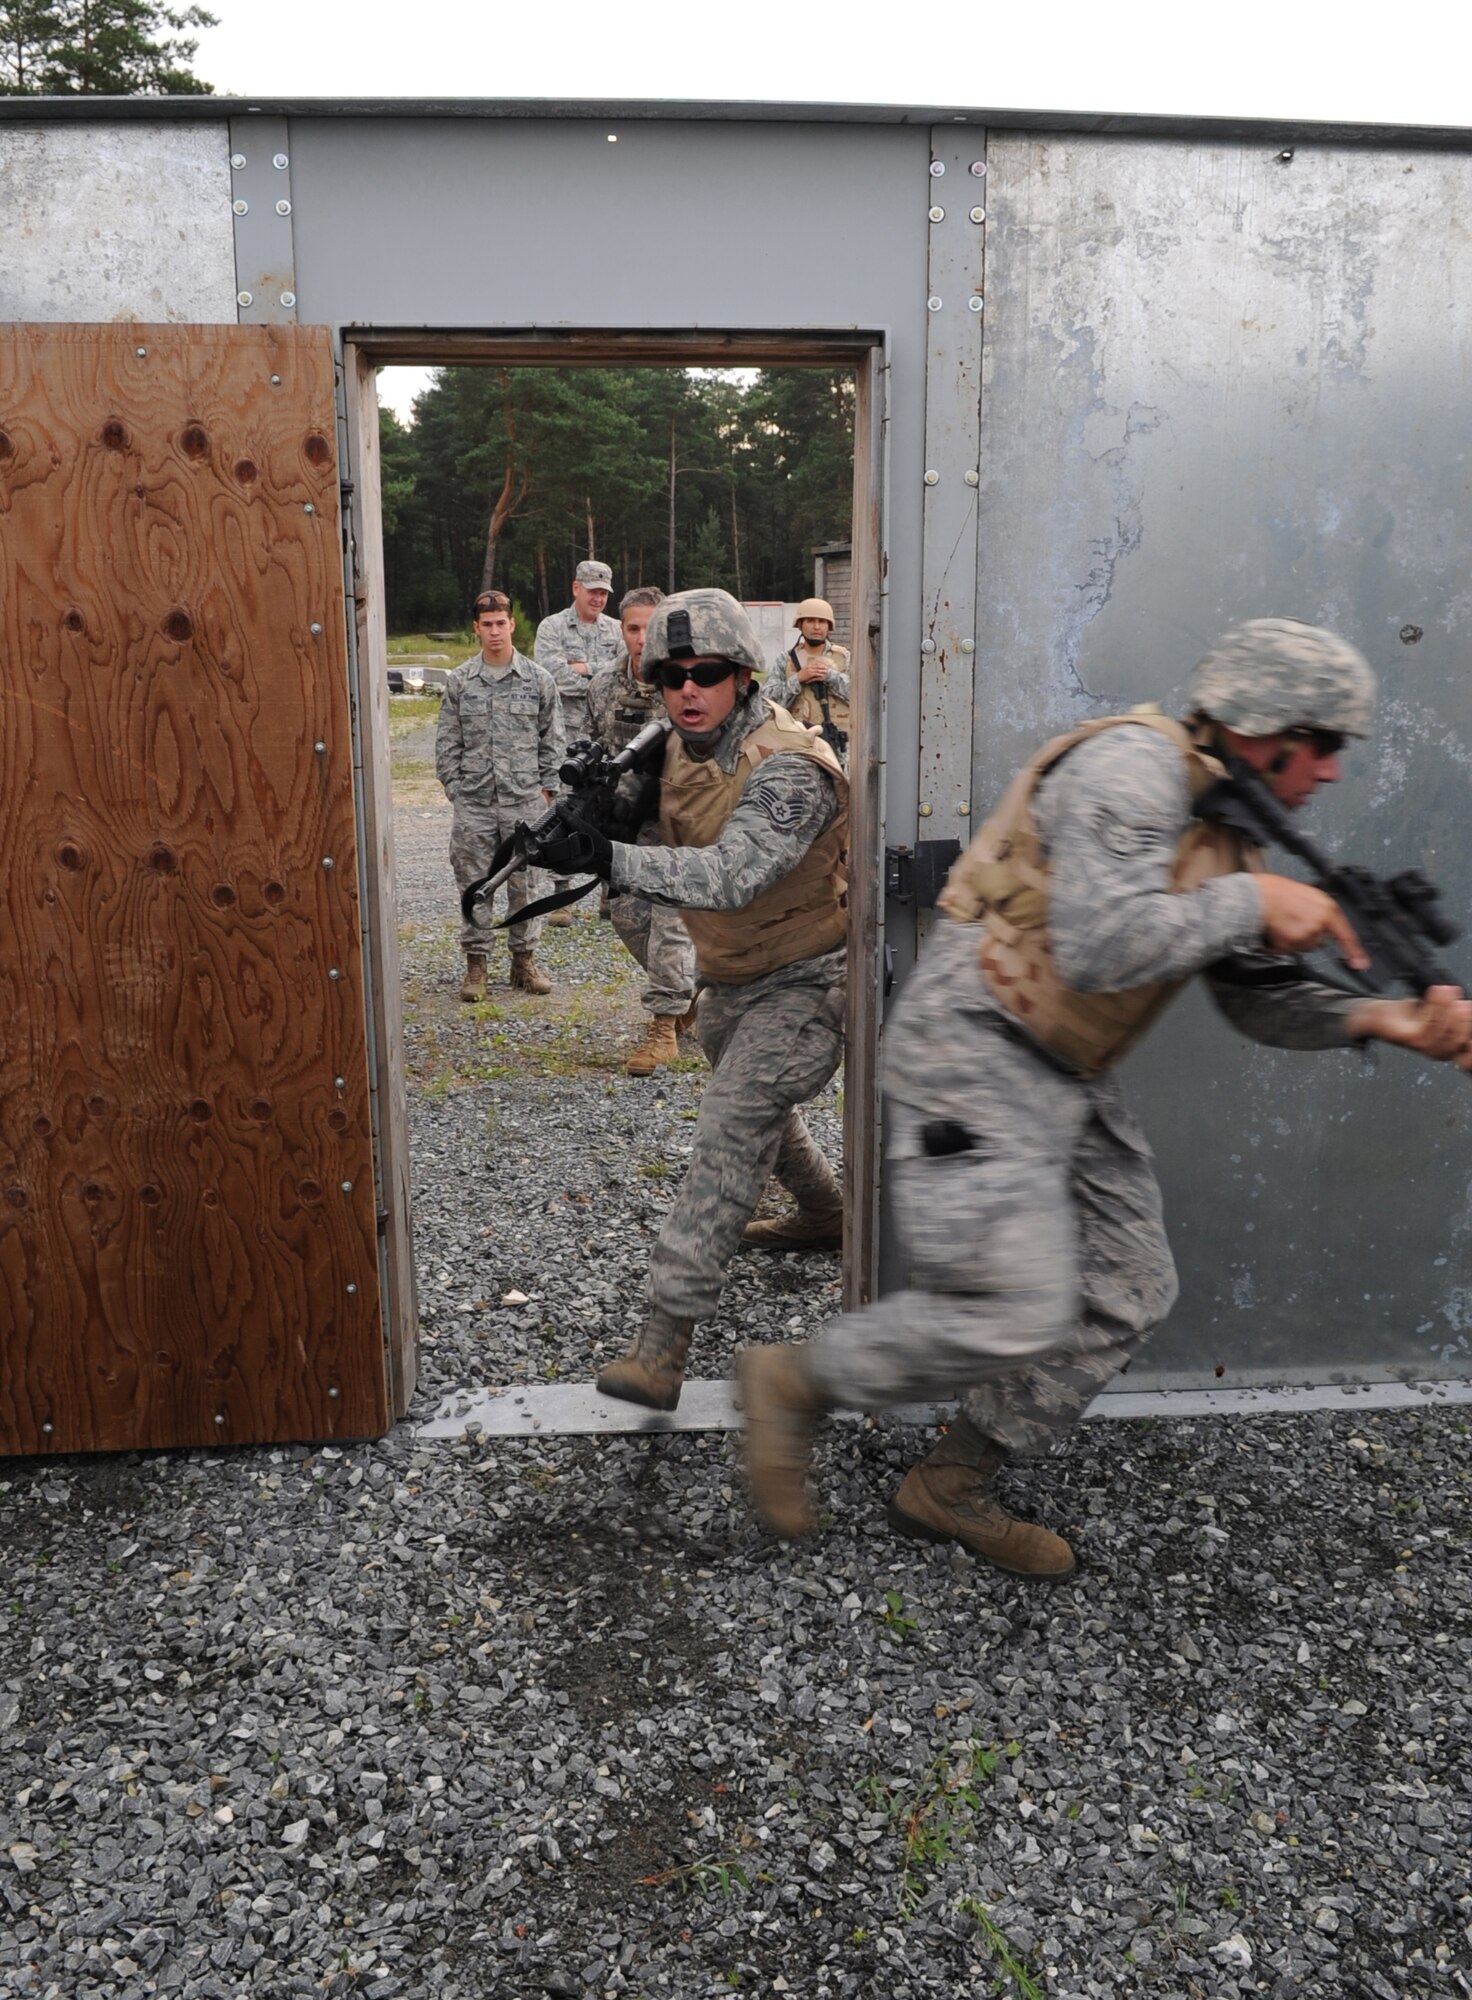 U.S. Air Force Airmen participating in urban close combat training clear a building during exercise ALLIED STRIKE 10, Grafenwoehr, Germany, July 26, 2010. AS 10 is Europe's premier close air support (CAS) exercise, held annually to conduct robust, realistic CAS training that helps build partnership capacity among allied North Atlantic Treaty Organization nations and joint services while refining the latest operational CAS tactics. For more ALLIED STRIKE Strike information go to www.usafe.af.mil/alliedstrike.asp. (U.S. Air Force photo by Senior Airman Caleb Pierce)